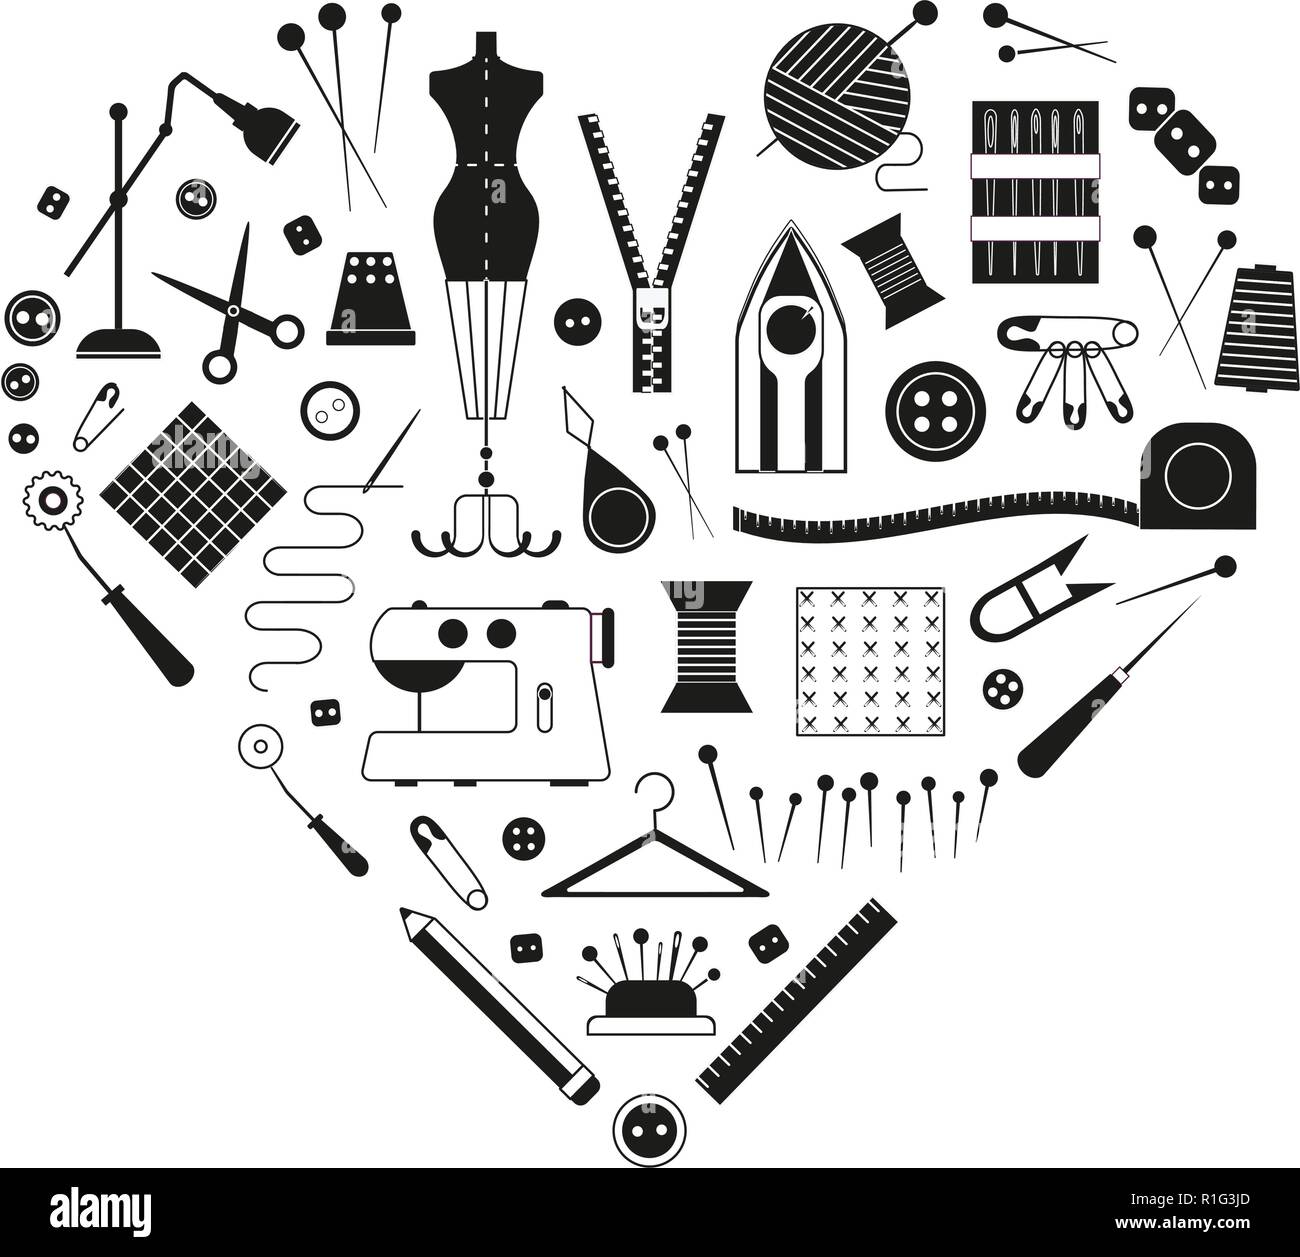 Sewing Supplies Tools Yourself Sewing Tailoring Dressmaking Needlework  Darning Arts Stock Vector by ©casejustin 252180614